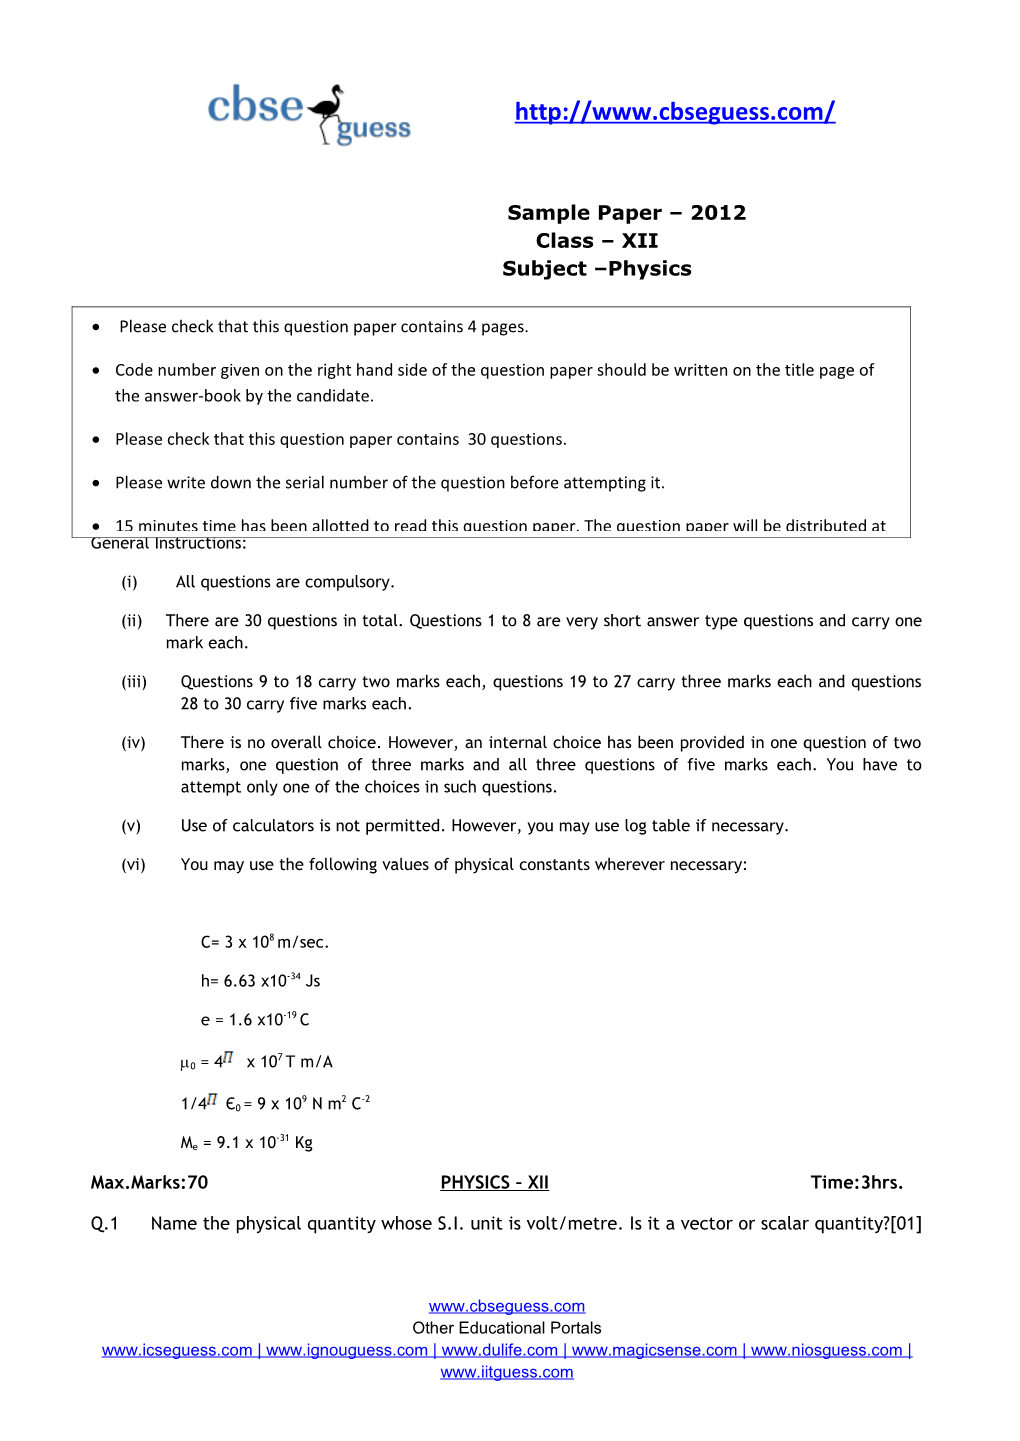 Sample Paper 2012 Class XII Subject Physics